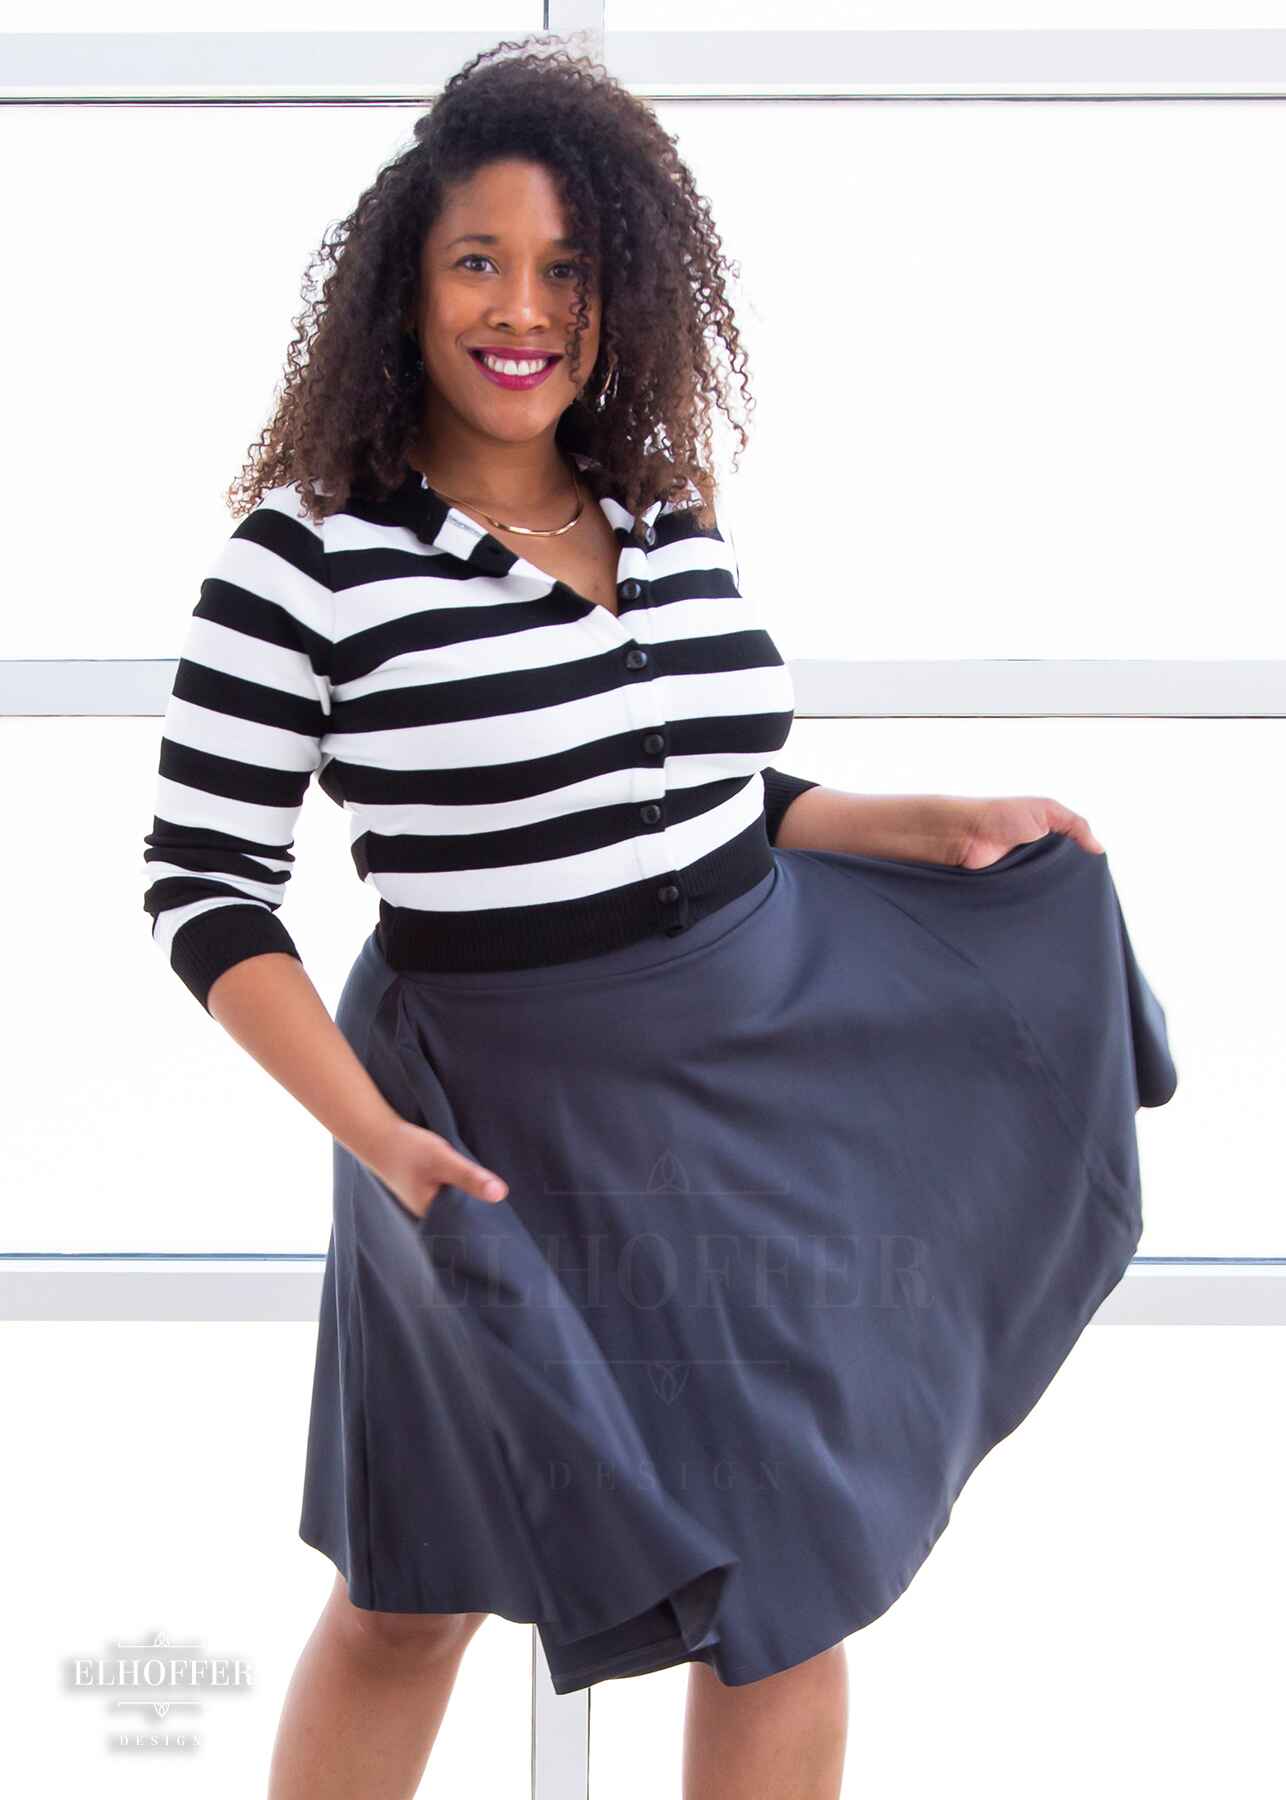 Francesca, a light skinned L model with dark brown shoulder length tight curly hair, is wearing a cropped knit button up cardigan with long sleeves, black and white horizontal stripes, and a black hood.